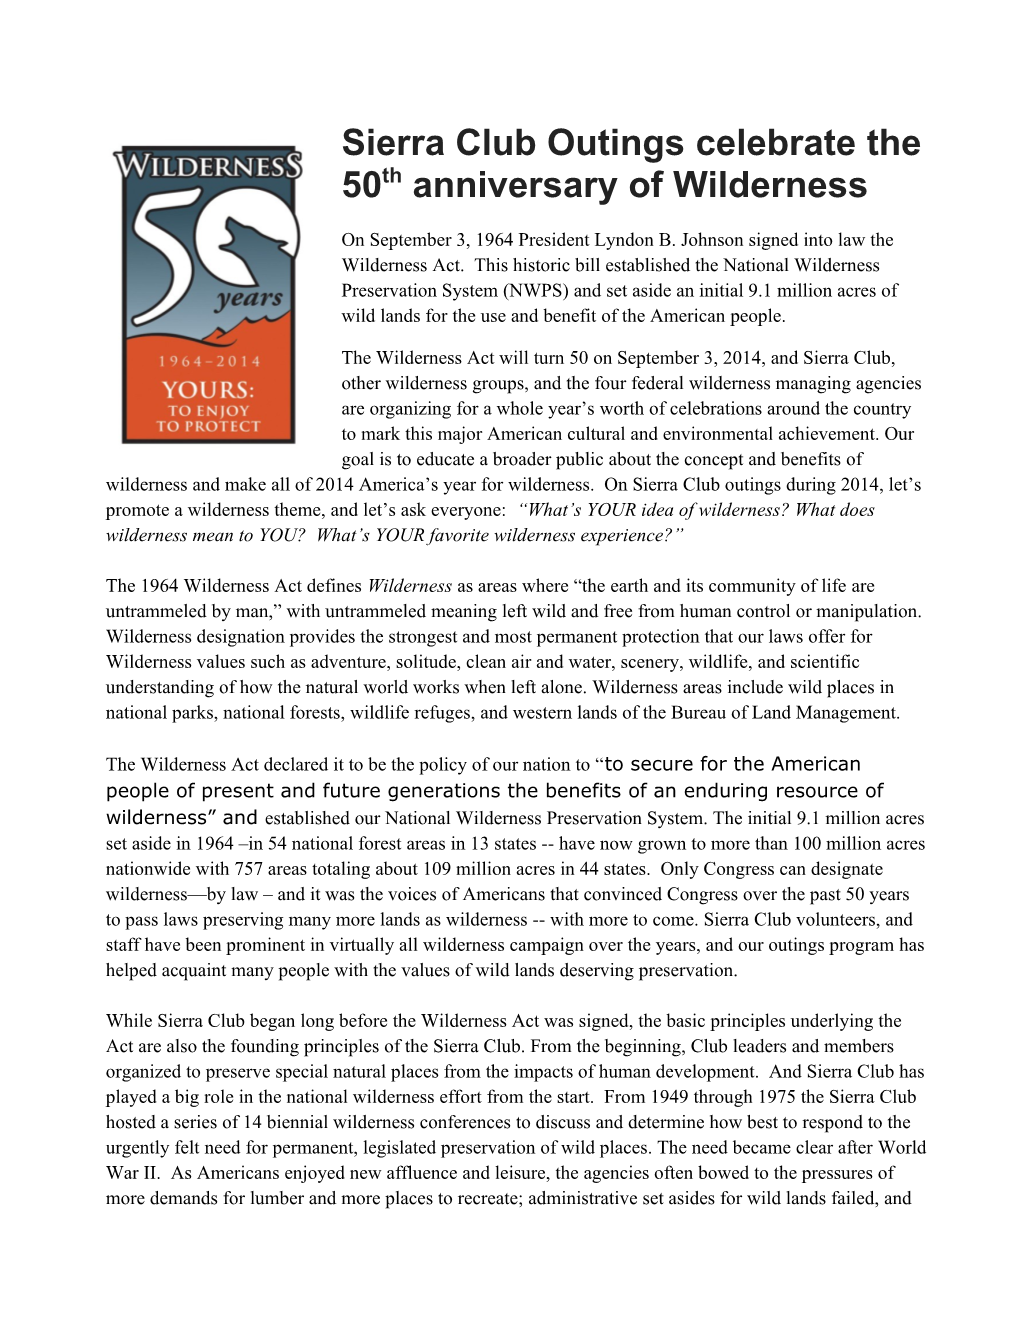 Sierra Club Outings Celebrate the 50Th Anniversary of Wilderness